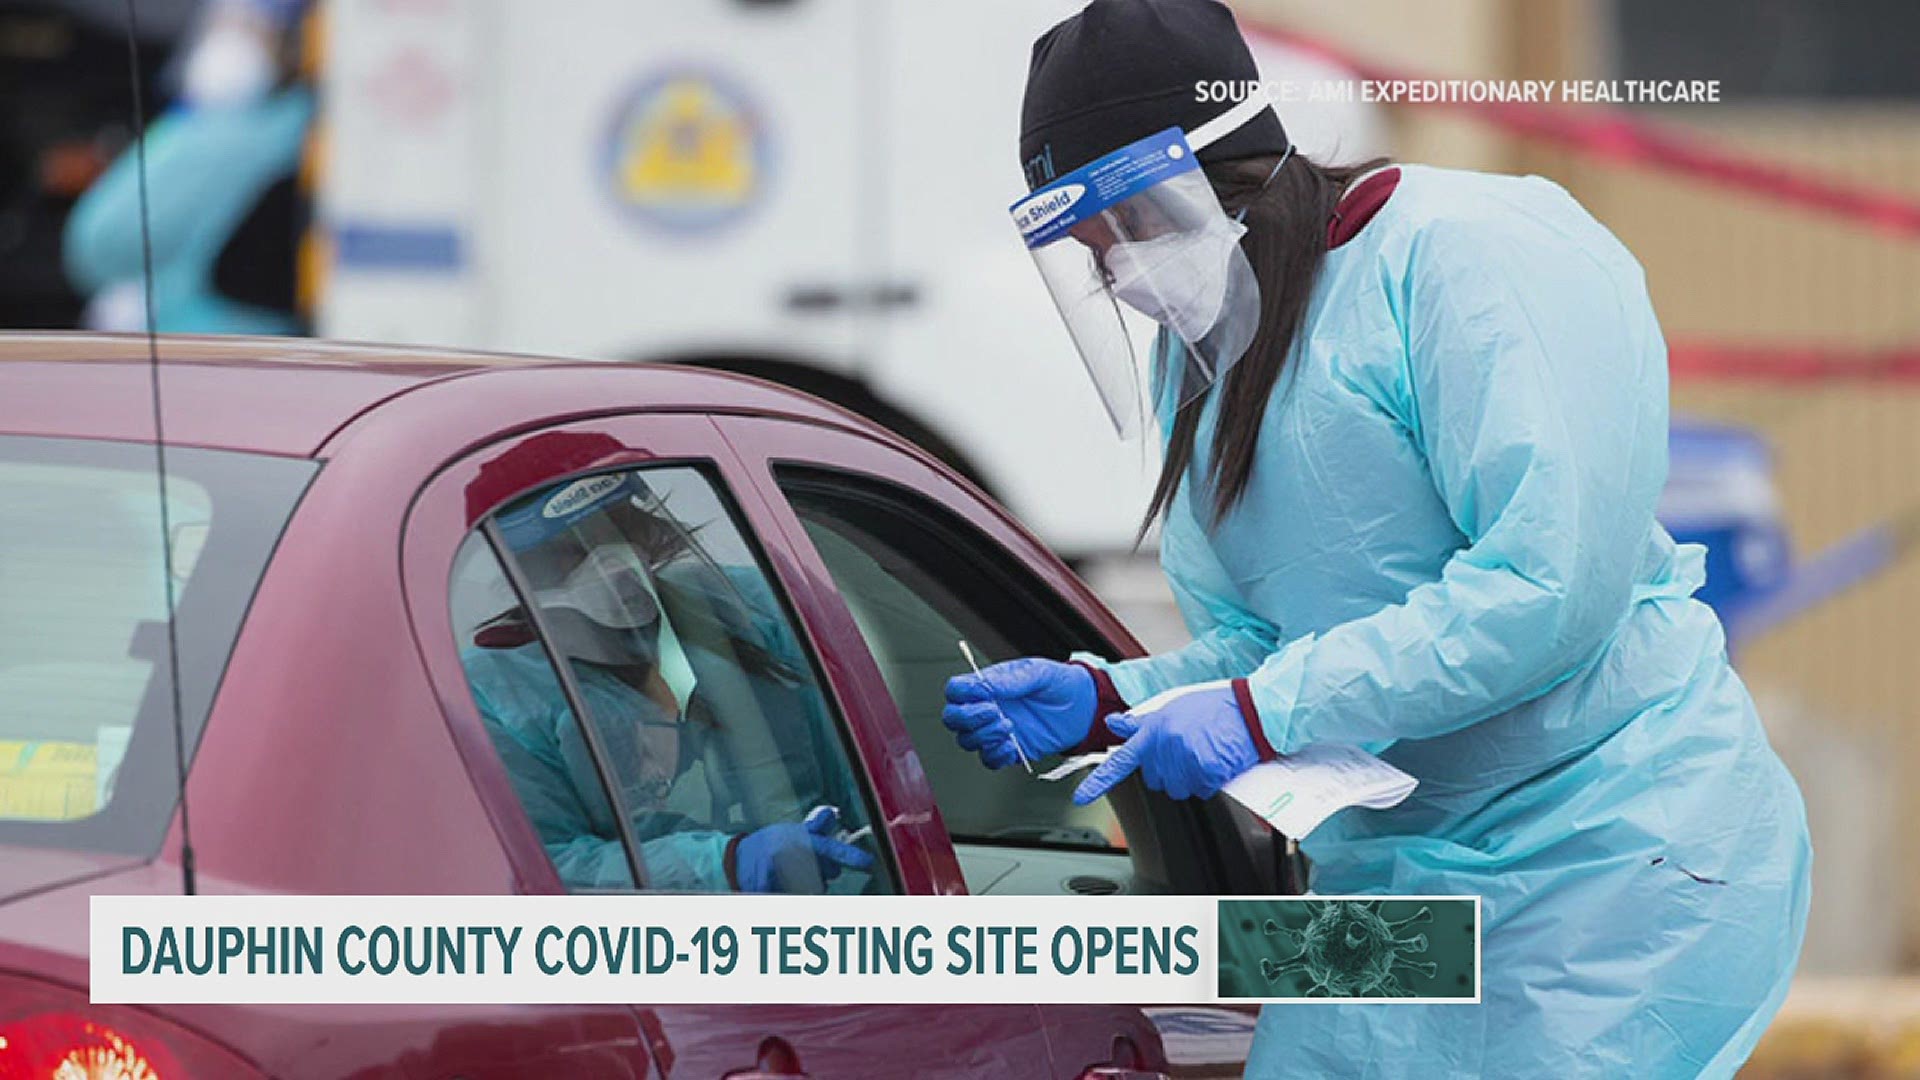 The testing site will run through April 10, and will be able to test up to 450 people per day.